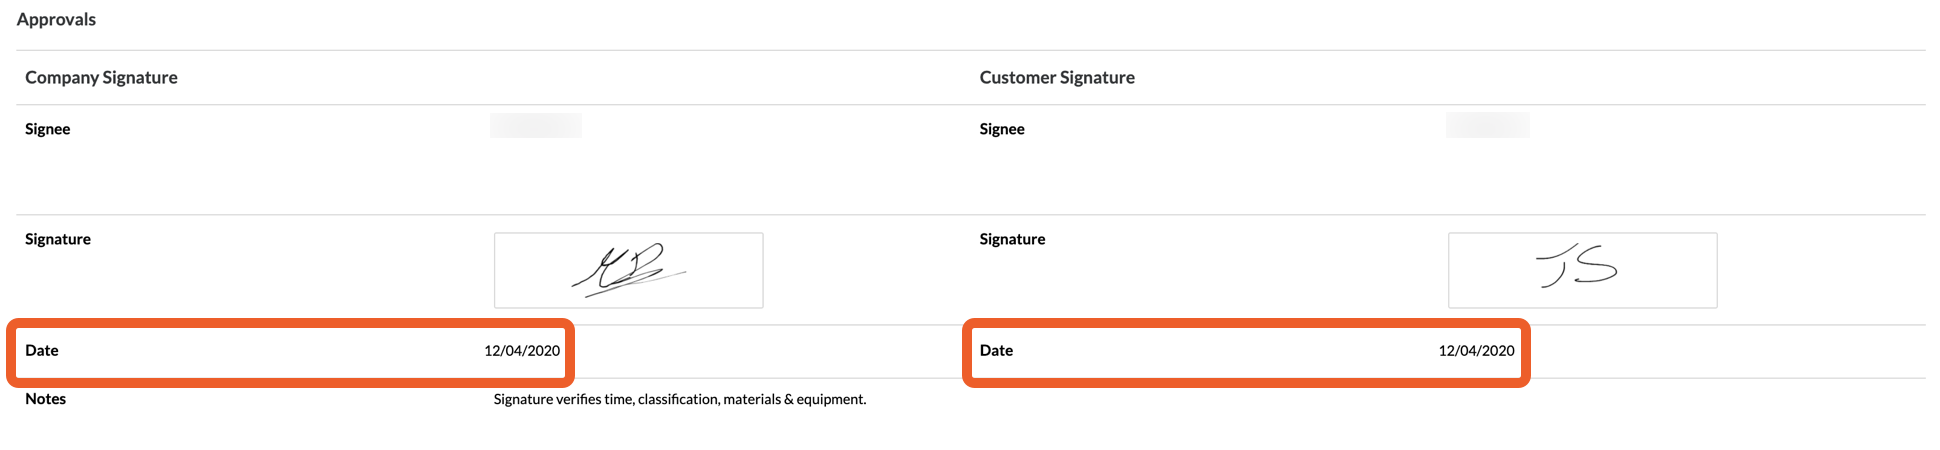 signatures-completed.png